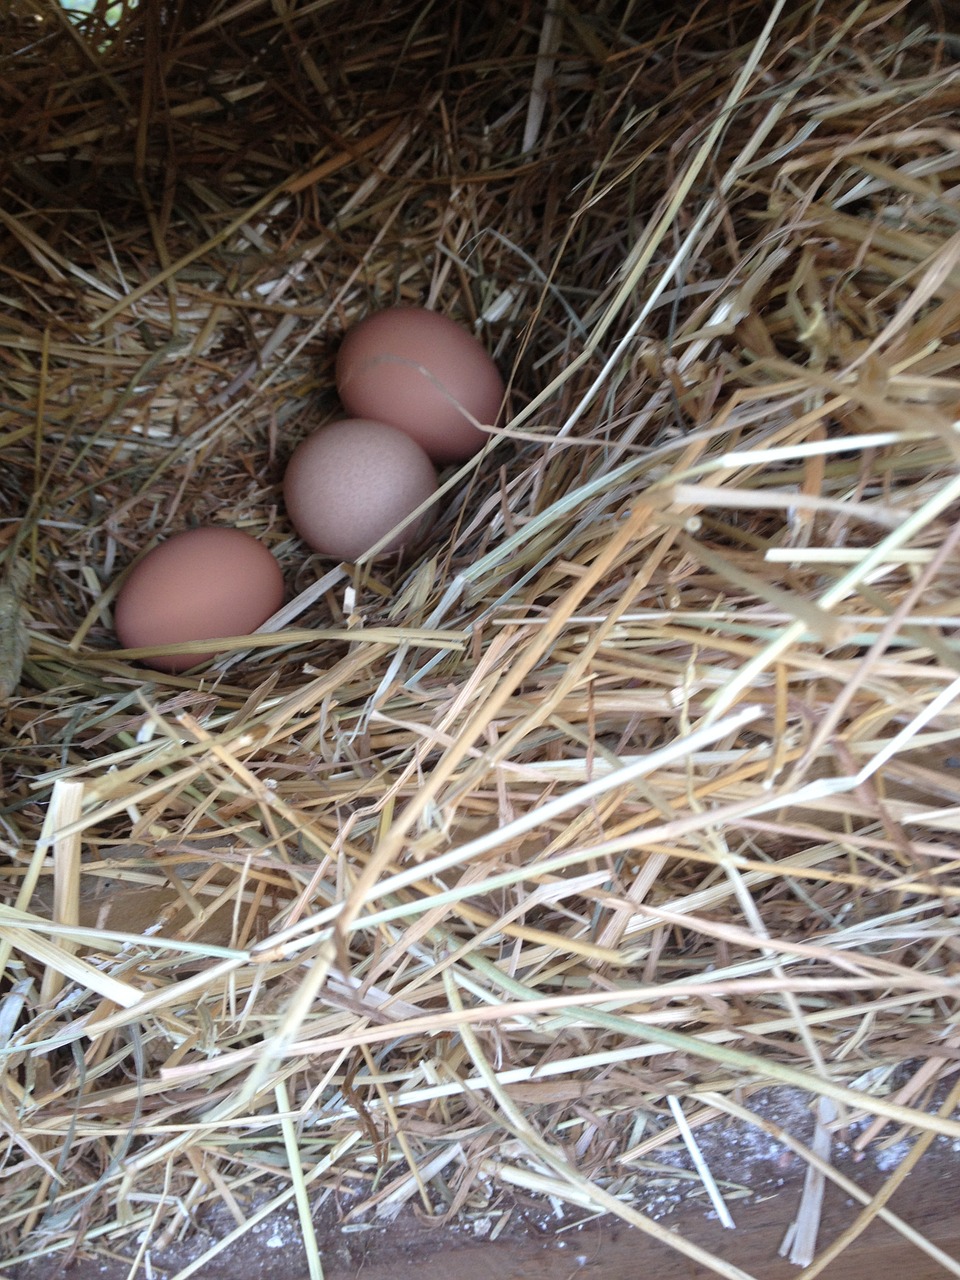 eggs poultry organic free photo